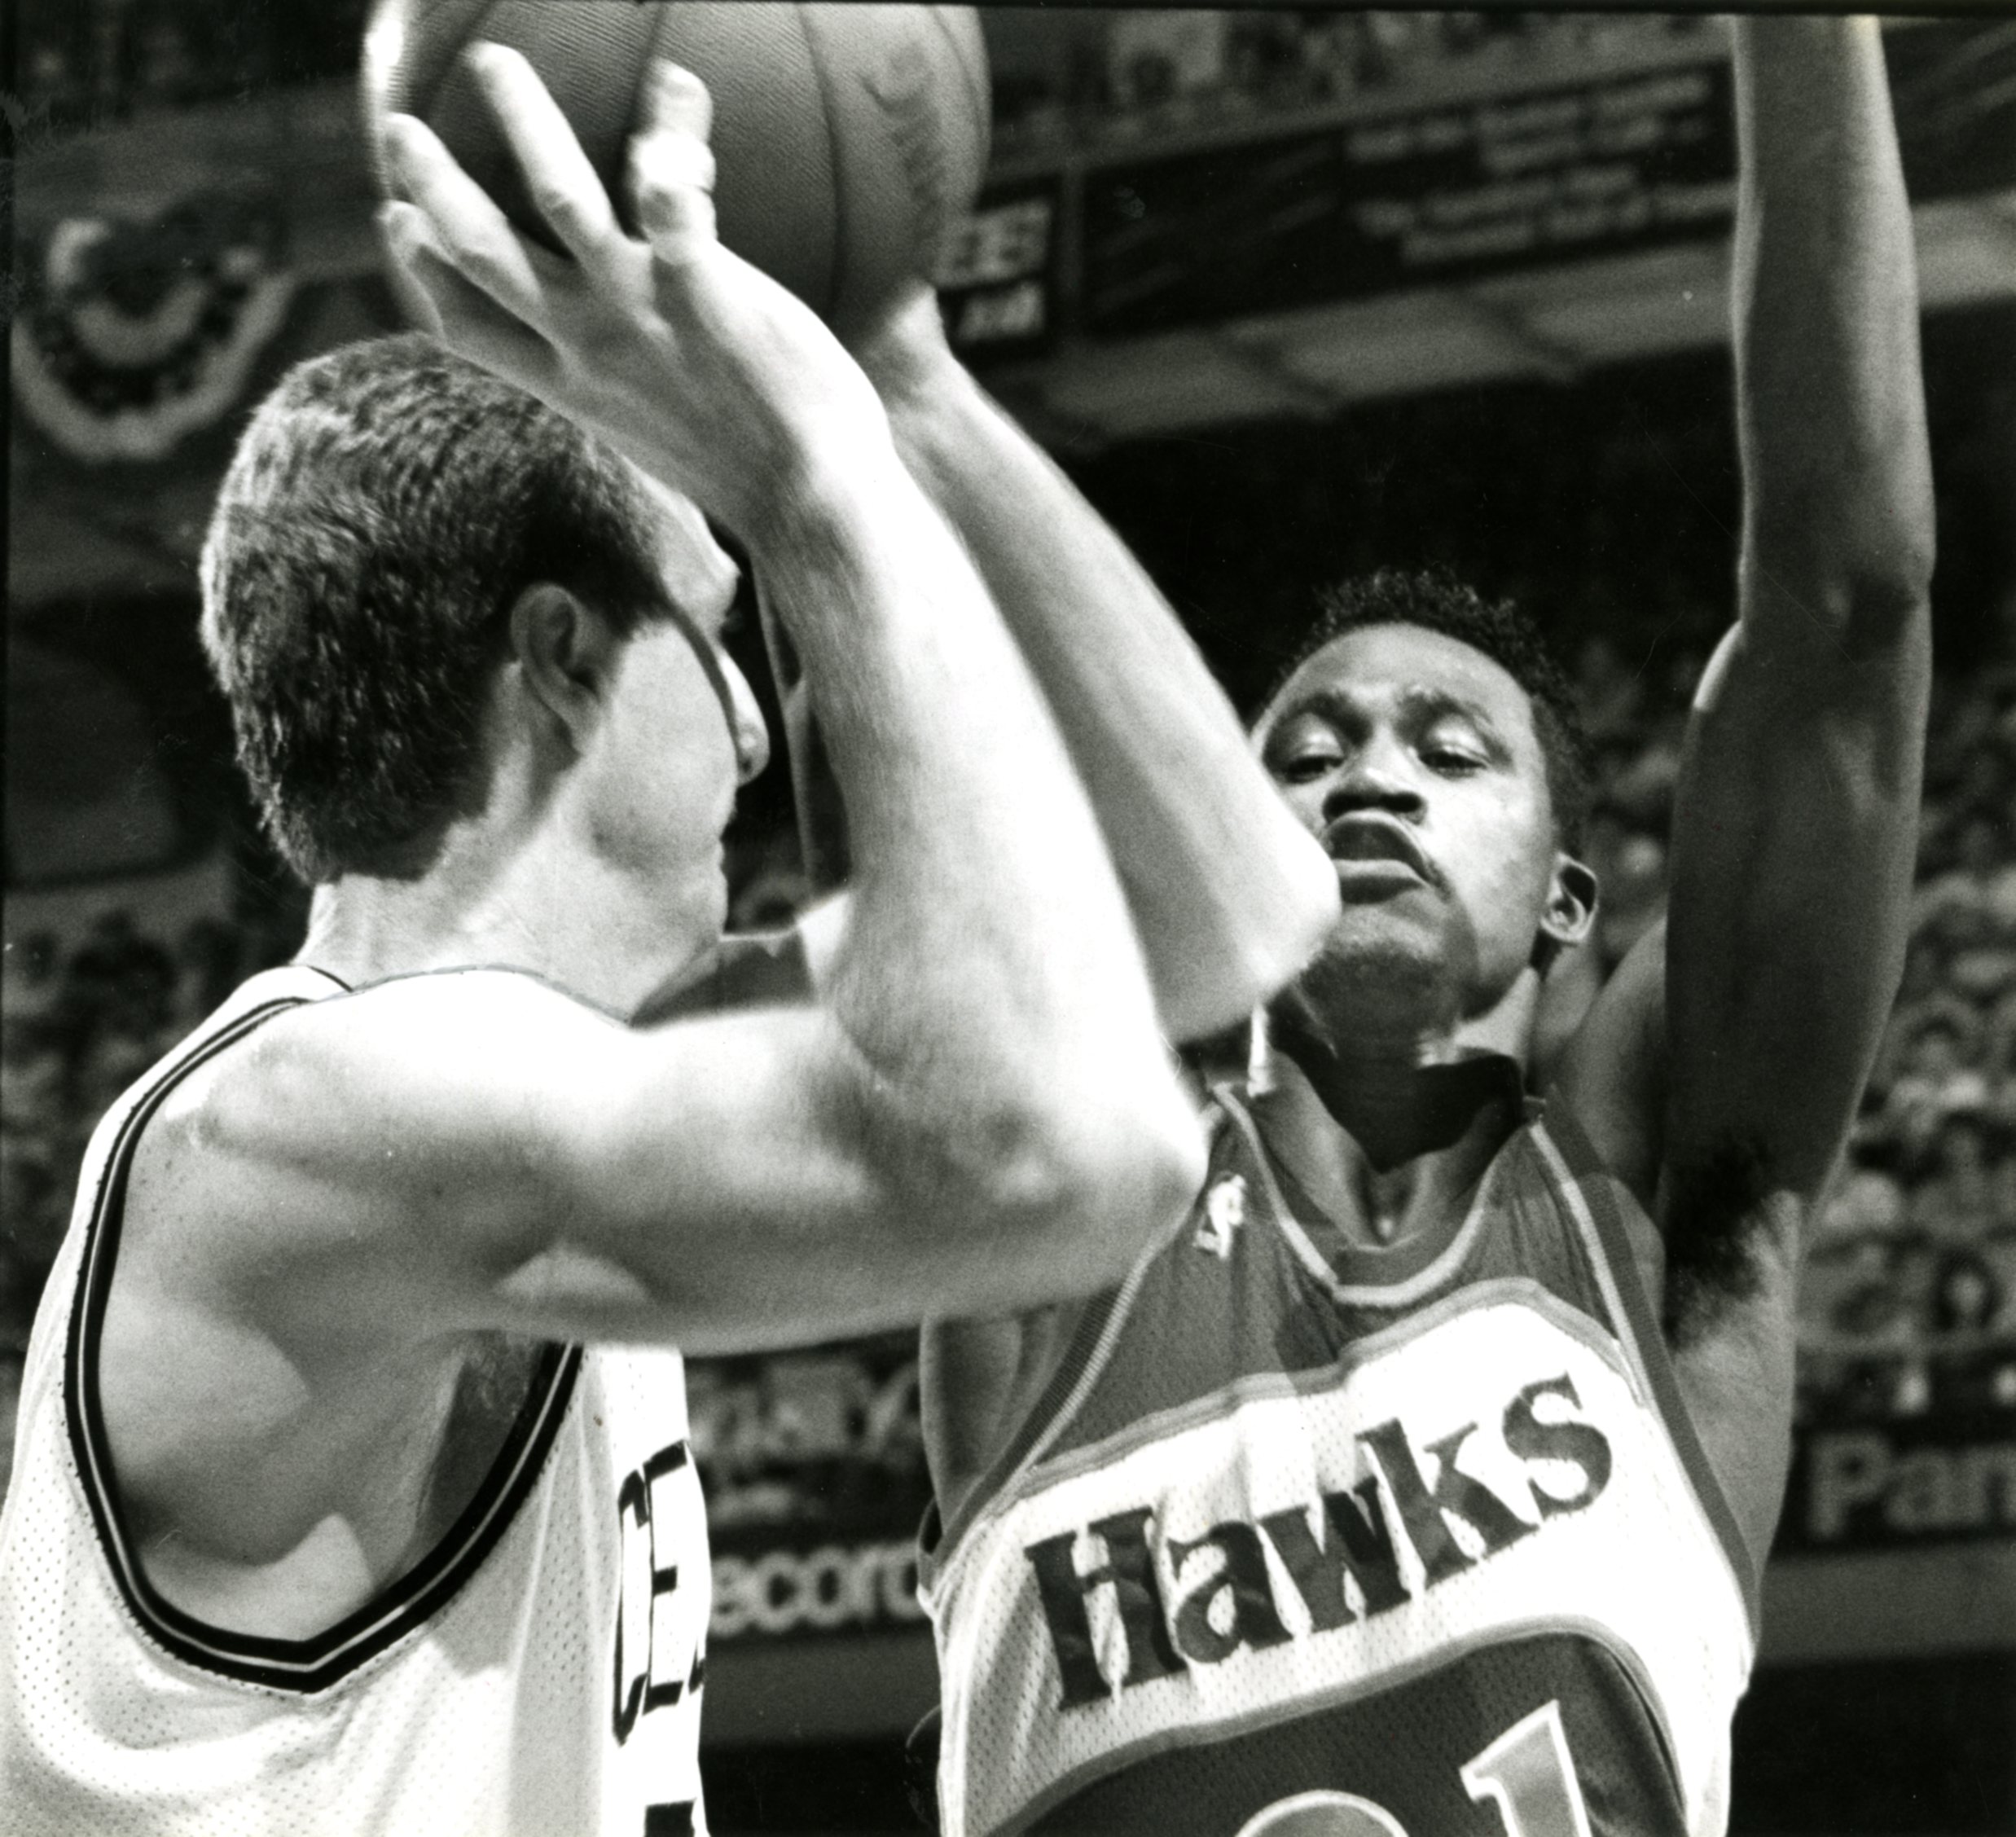 Atlanta Hawks star Dominique Wilkins and the Boston Celtics forward Larry Bird are pictured during Game 7 of the NBA playoffs.